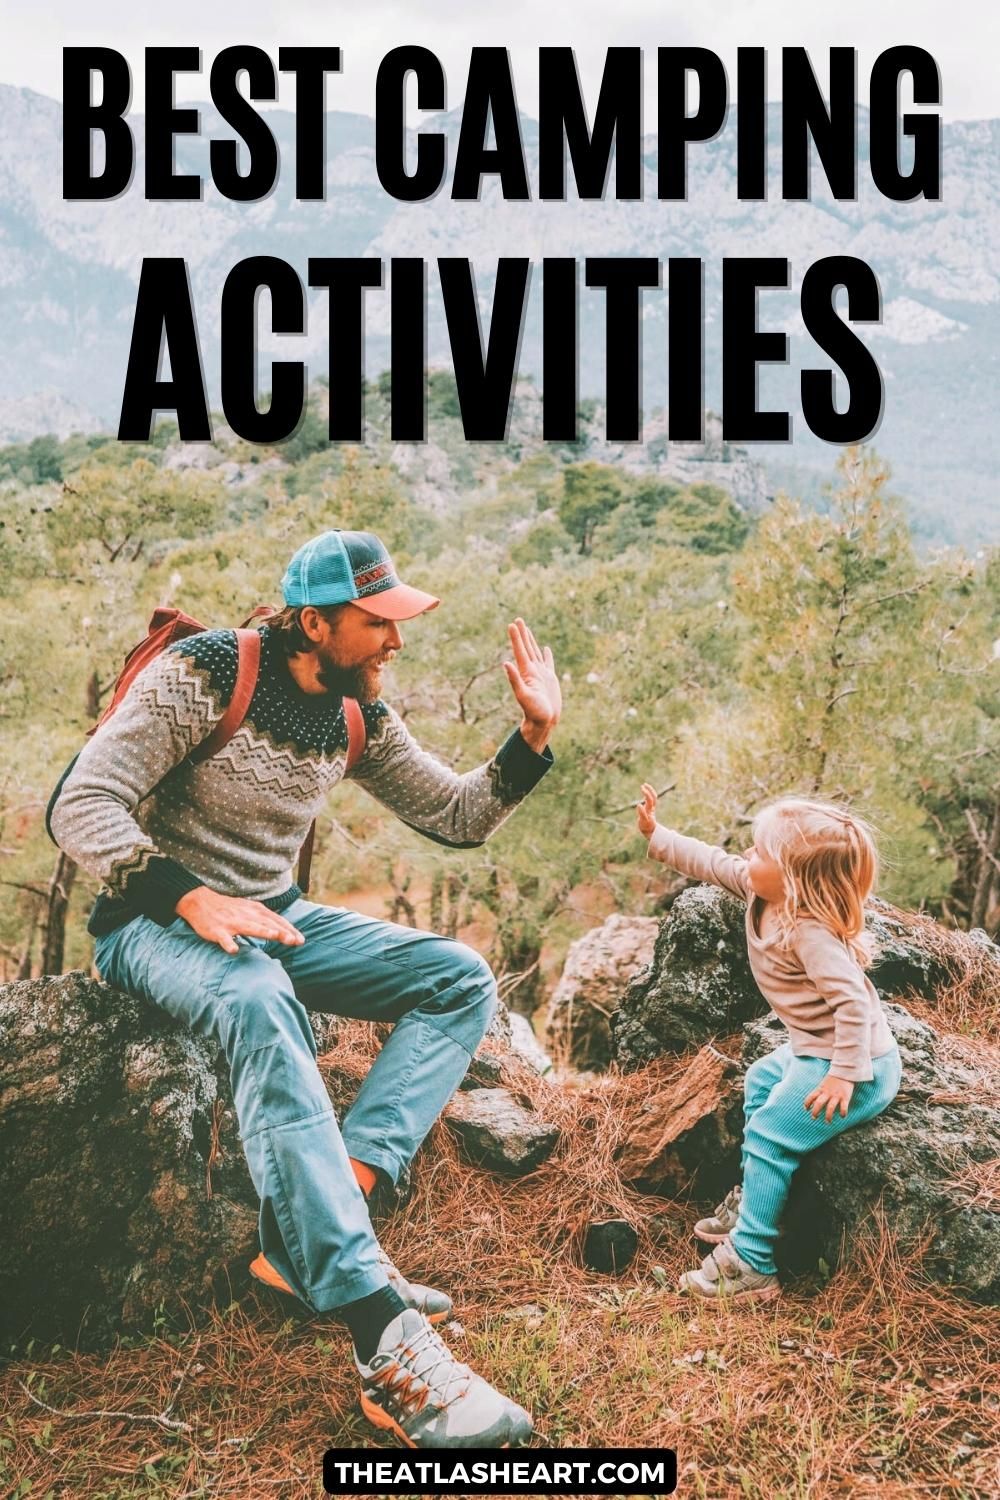 50 Fun & Best Camping Activities [Ideas for Kids and Adults]